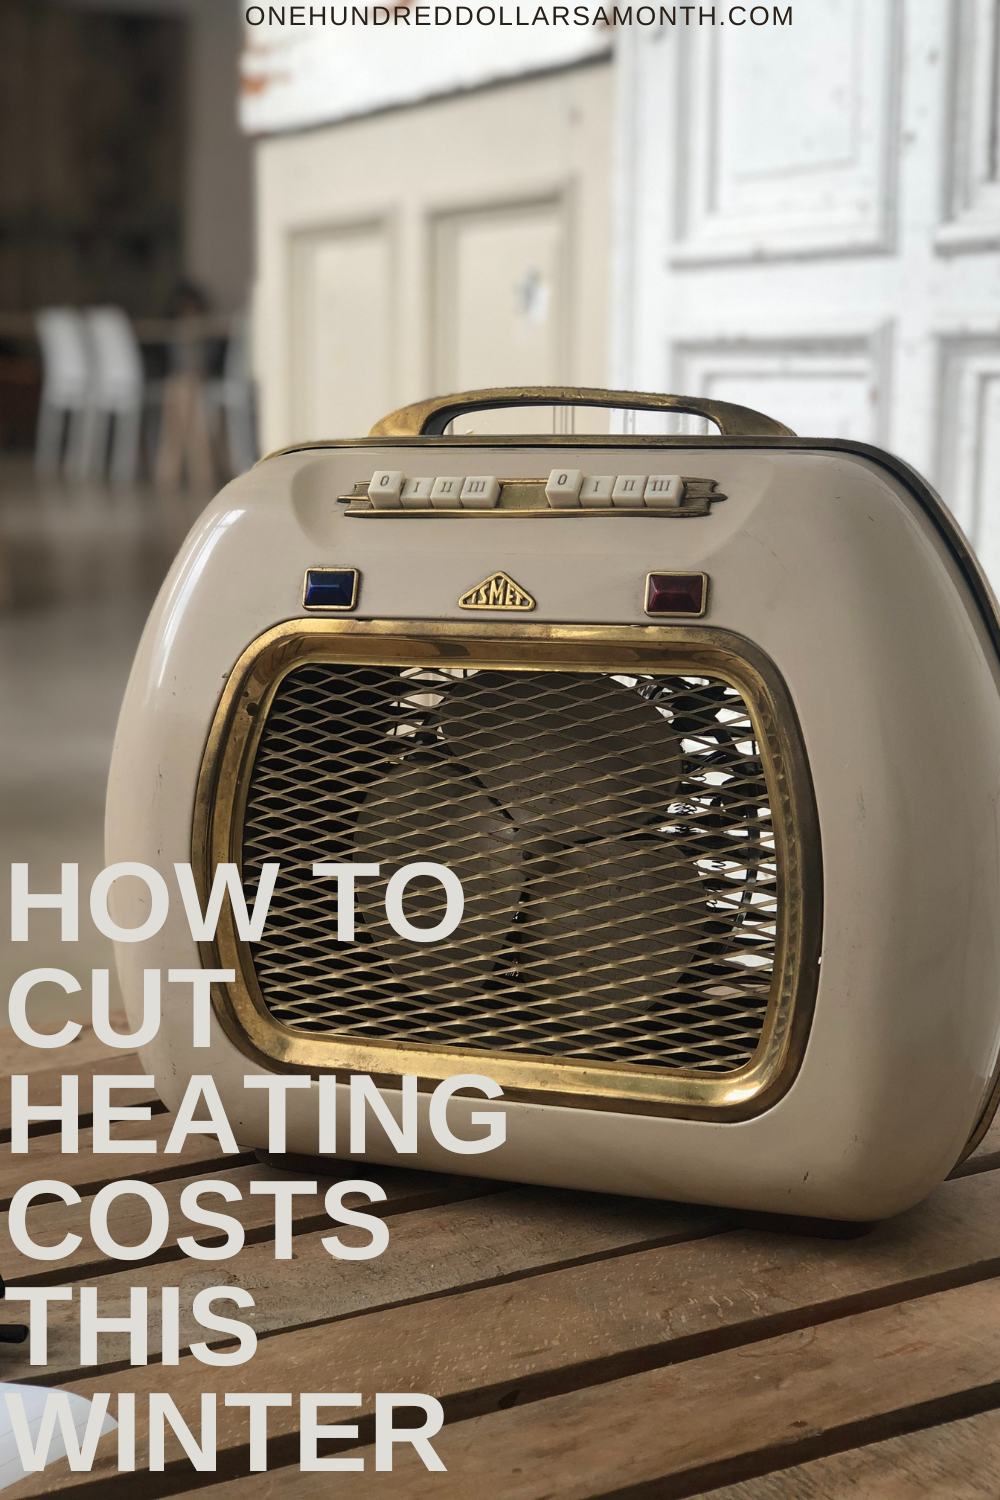 How To Cut Heating Costs This Winter – 12 Awesome Tips!